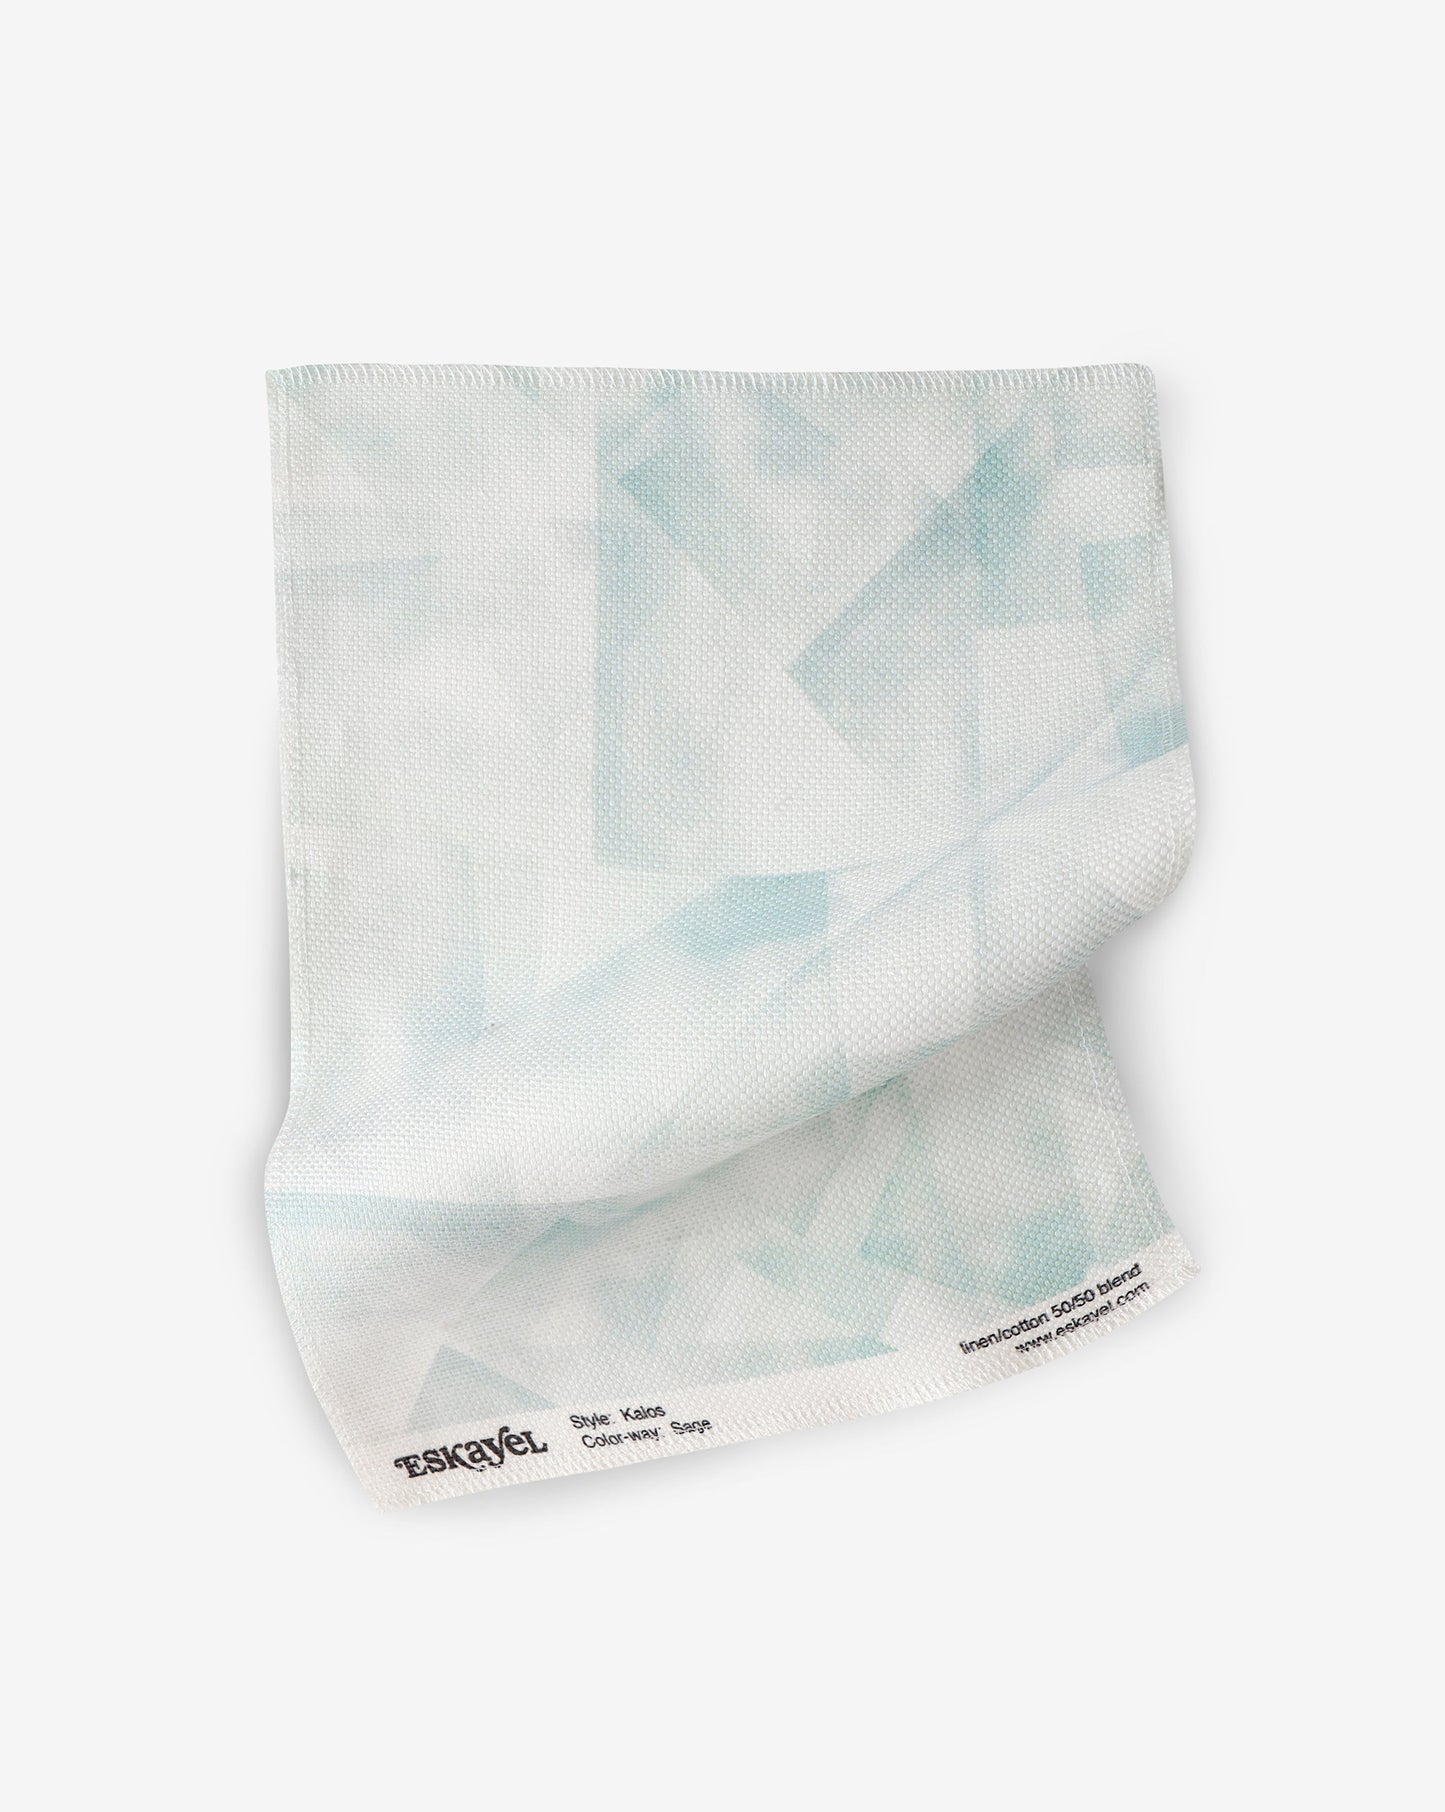 A white Kalos Fabric||Sage towel adorning blue triangles, inspired by the Canadian Pacific Northwest.